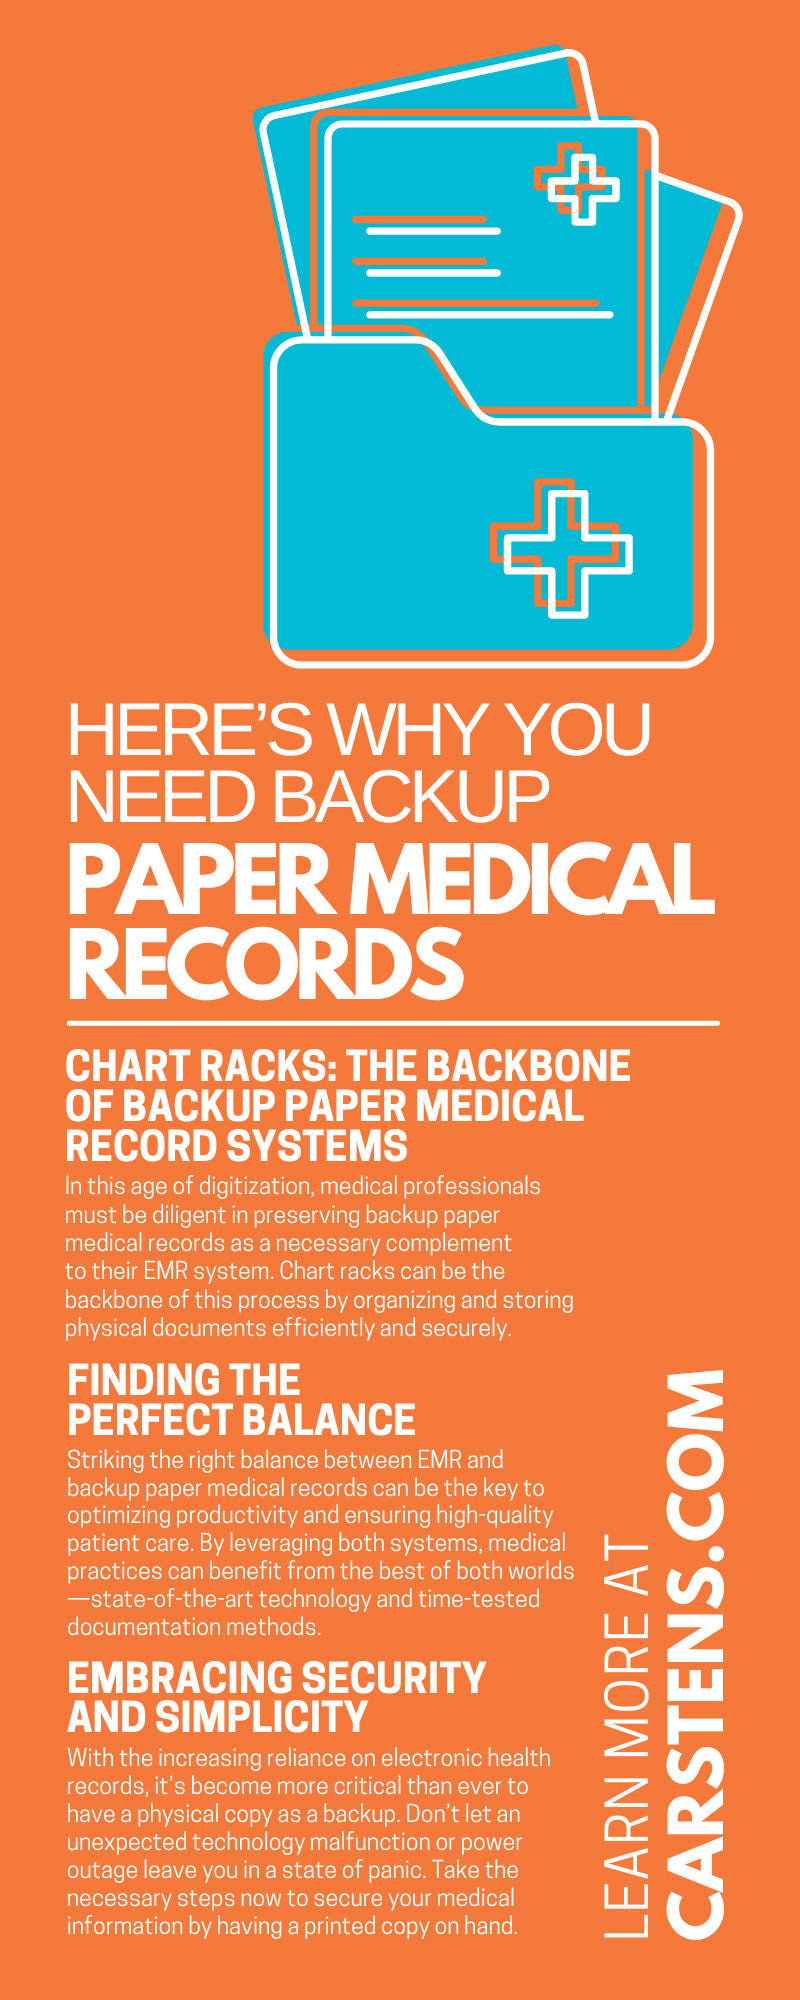 Here’s Why You Need Backup Paper Medical Records